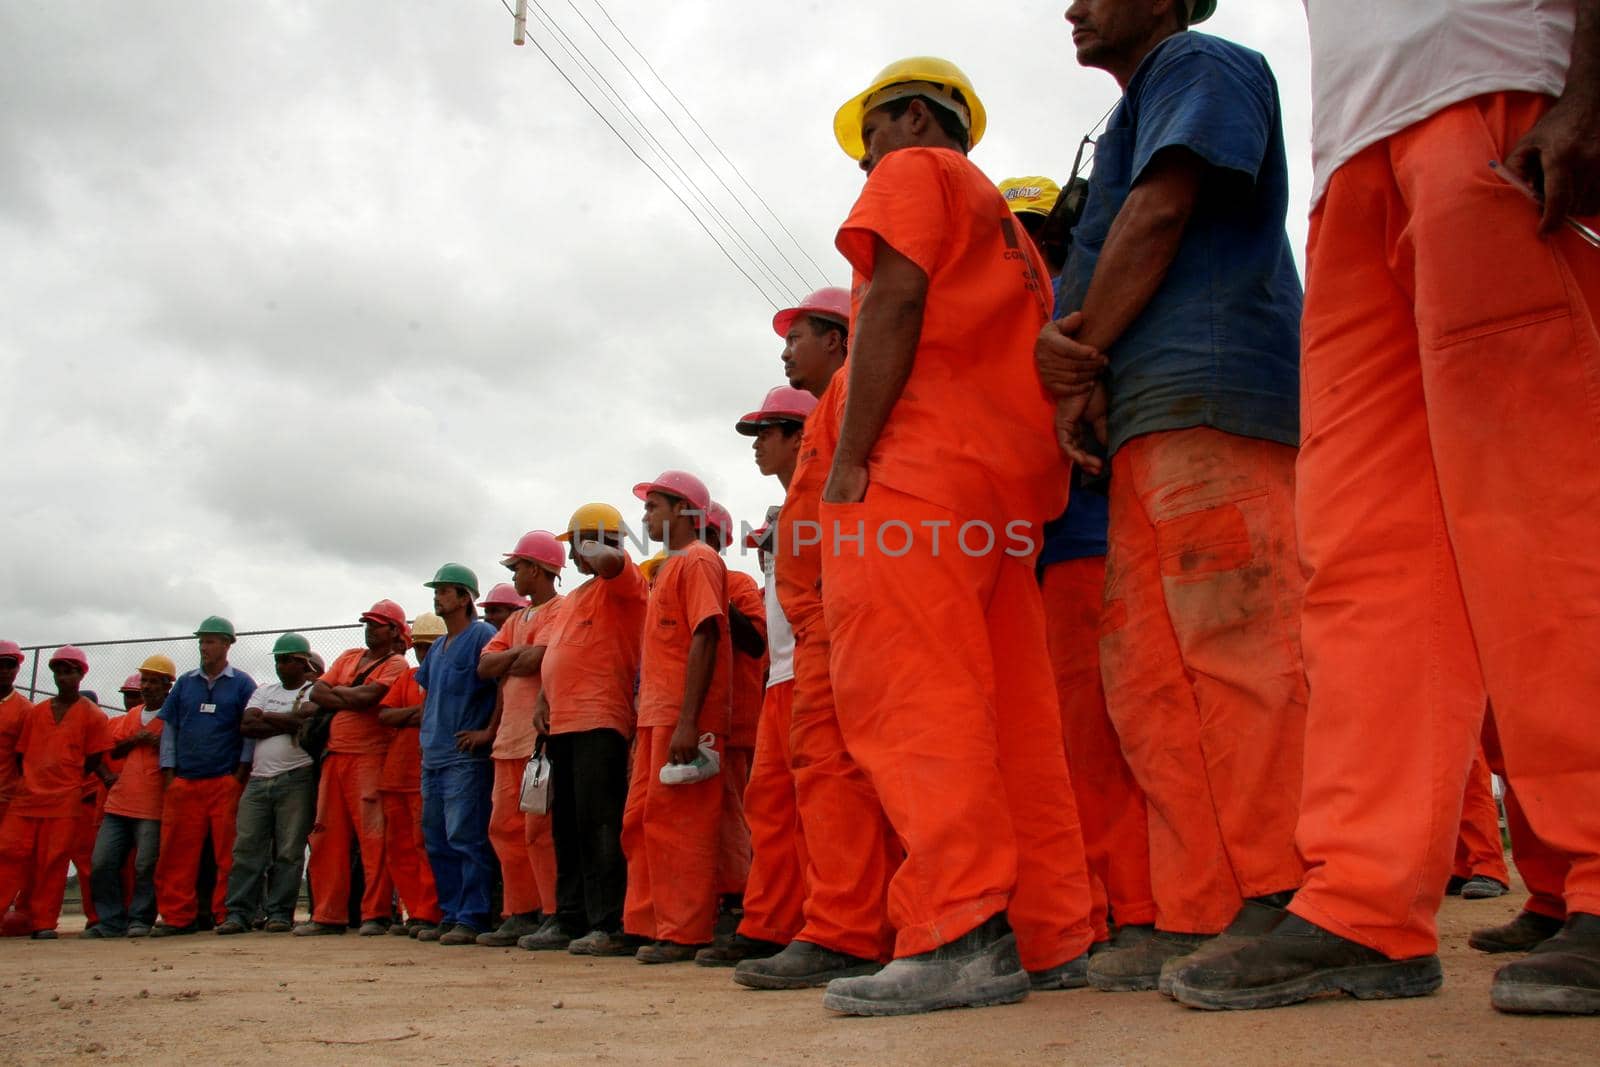 eunapolis, bahia / brazil - april 29, 2009: workers on strike are seen during the assembly as a union at a construction site in the city of Eunapolis.